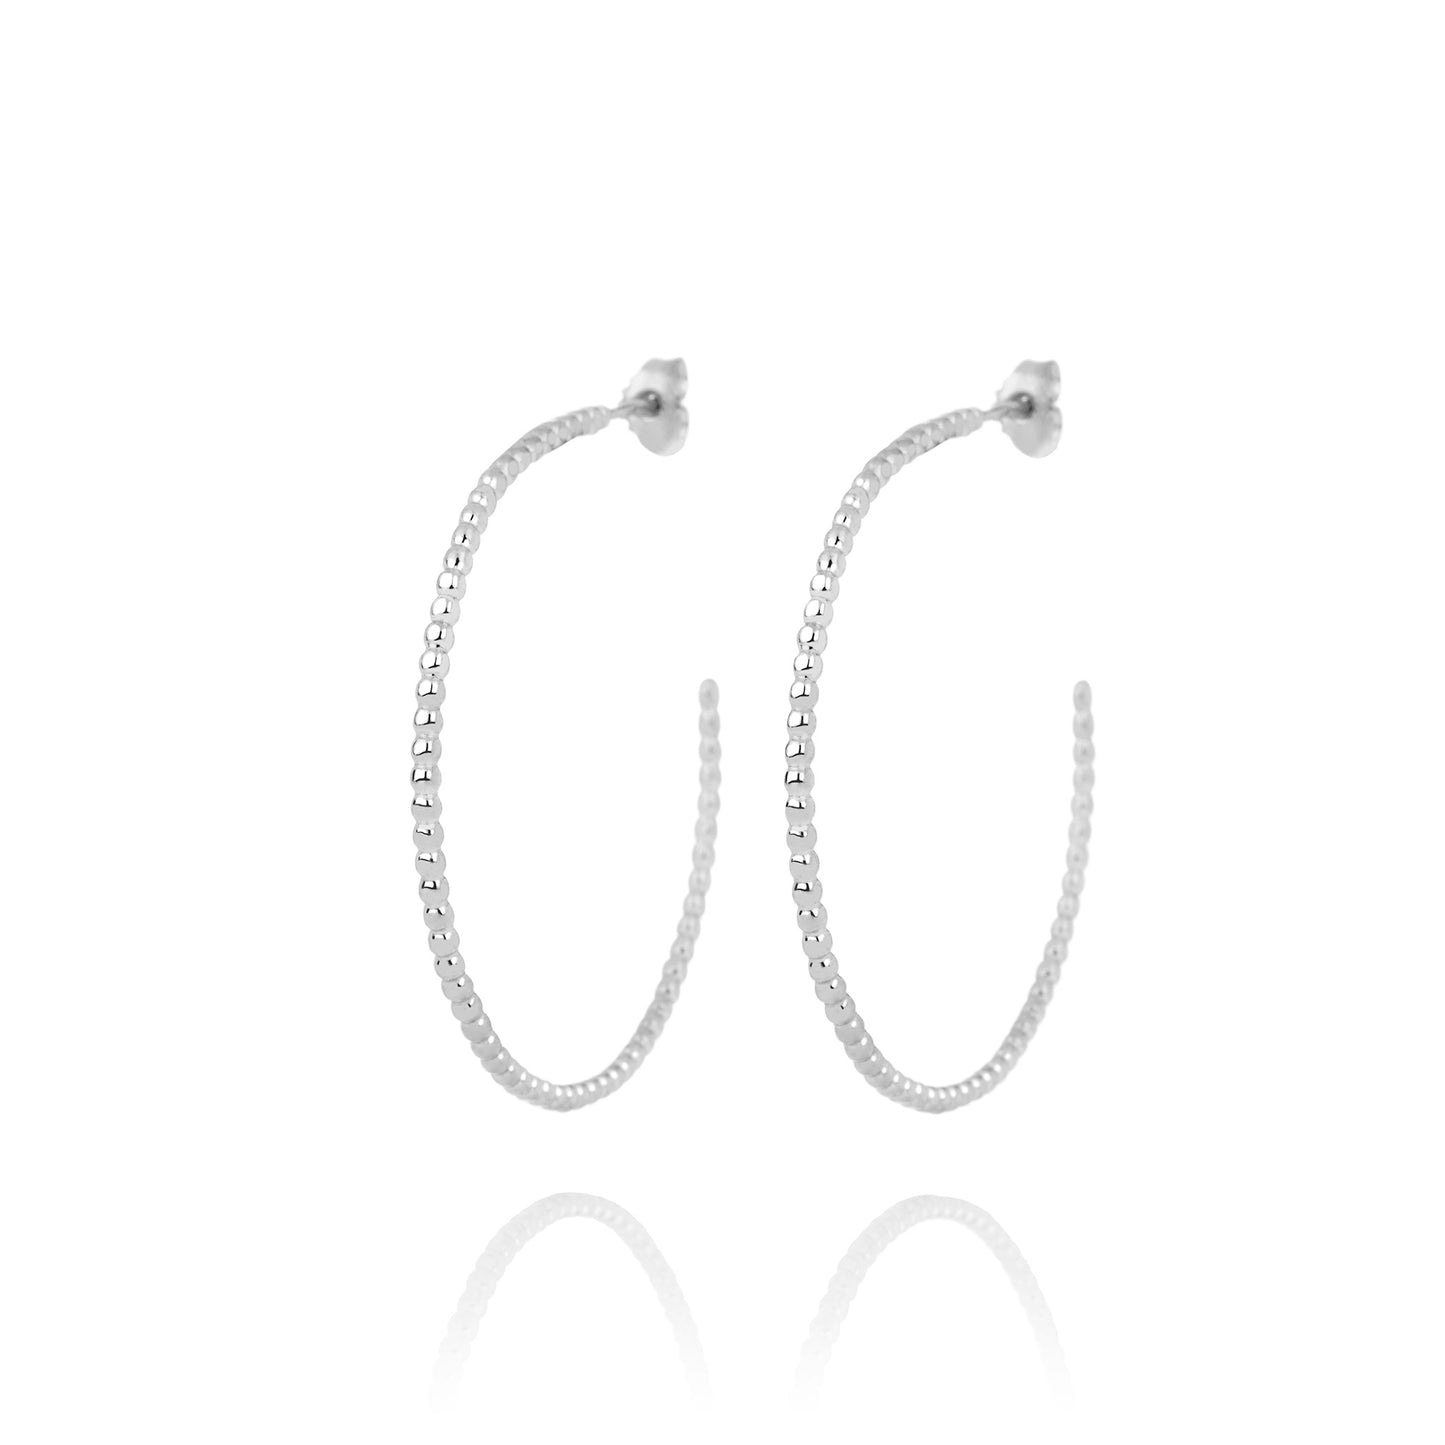 Tails hoops 45mm - rhodium